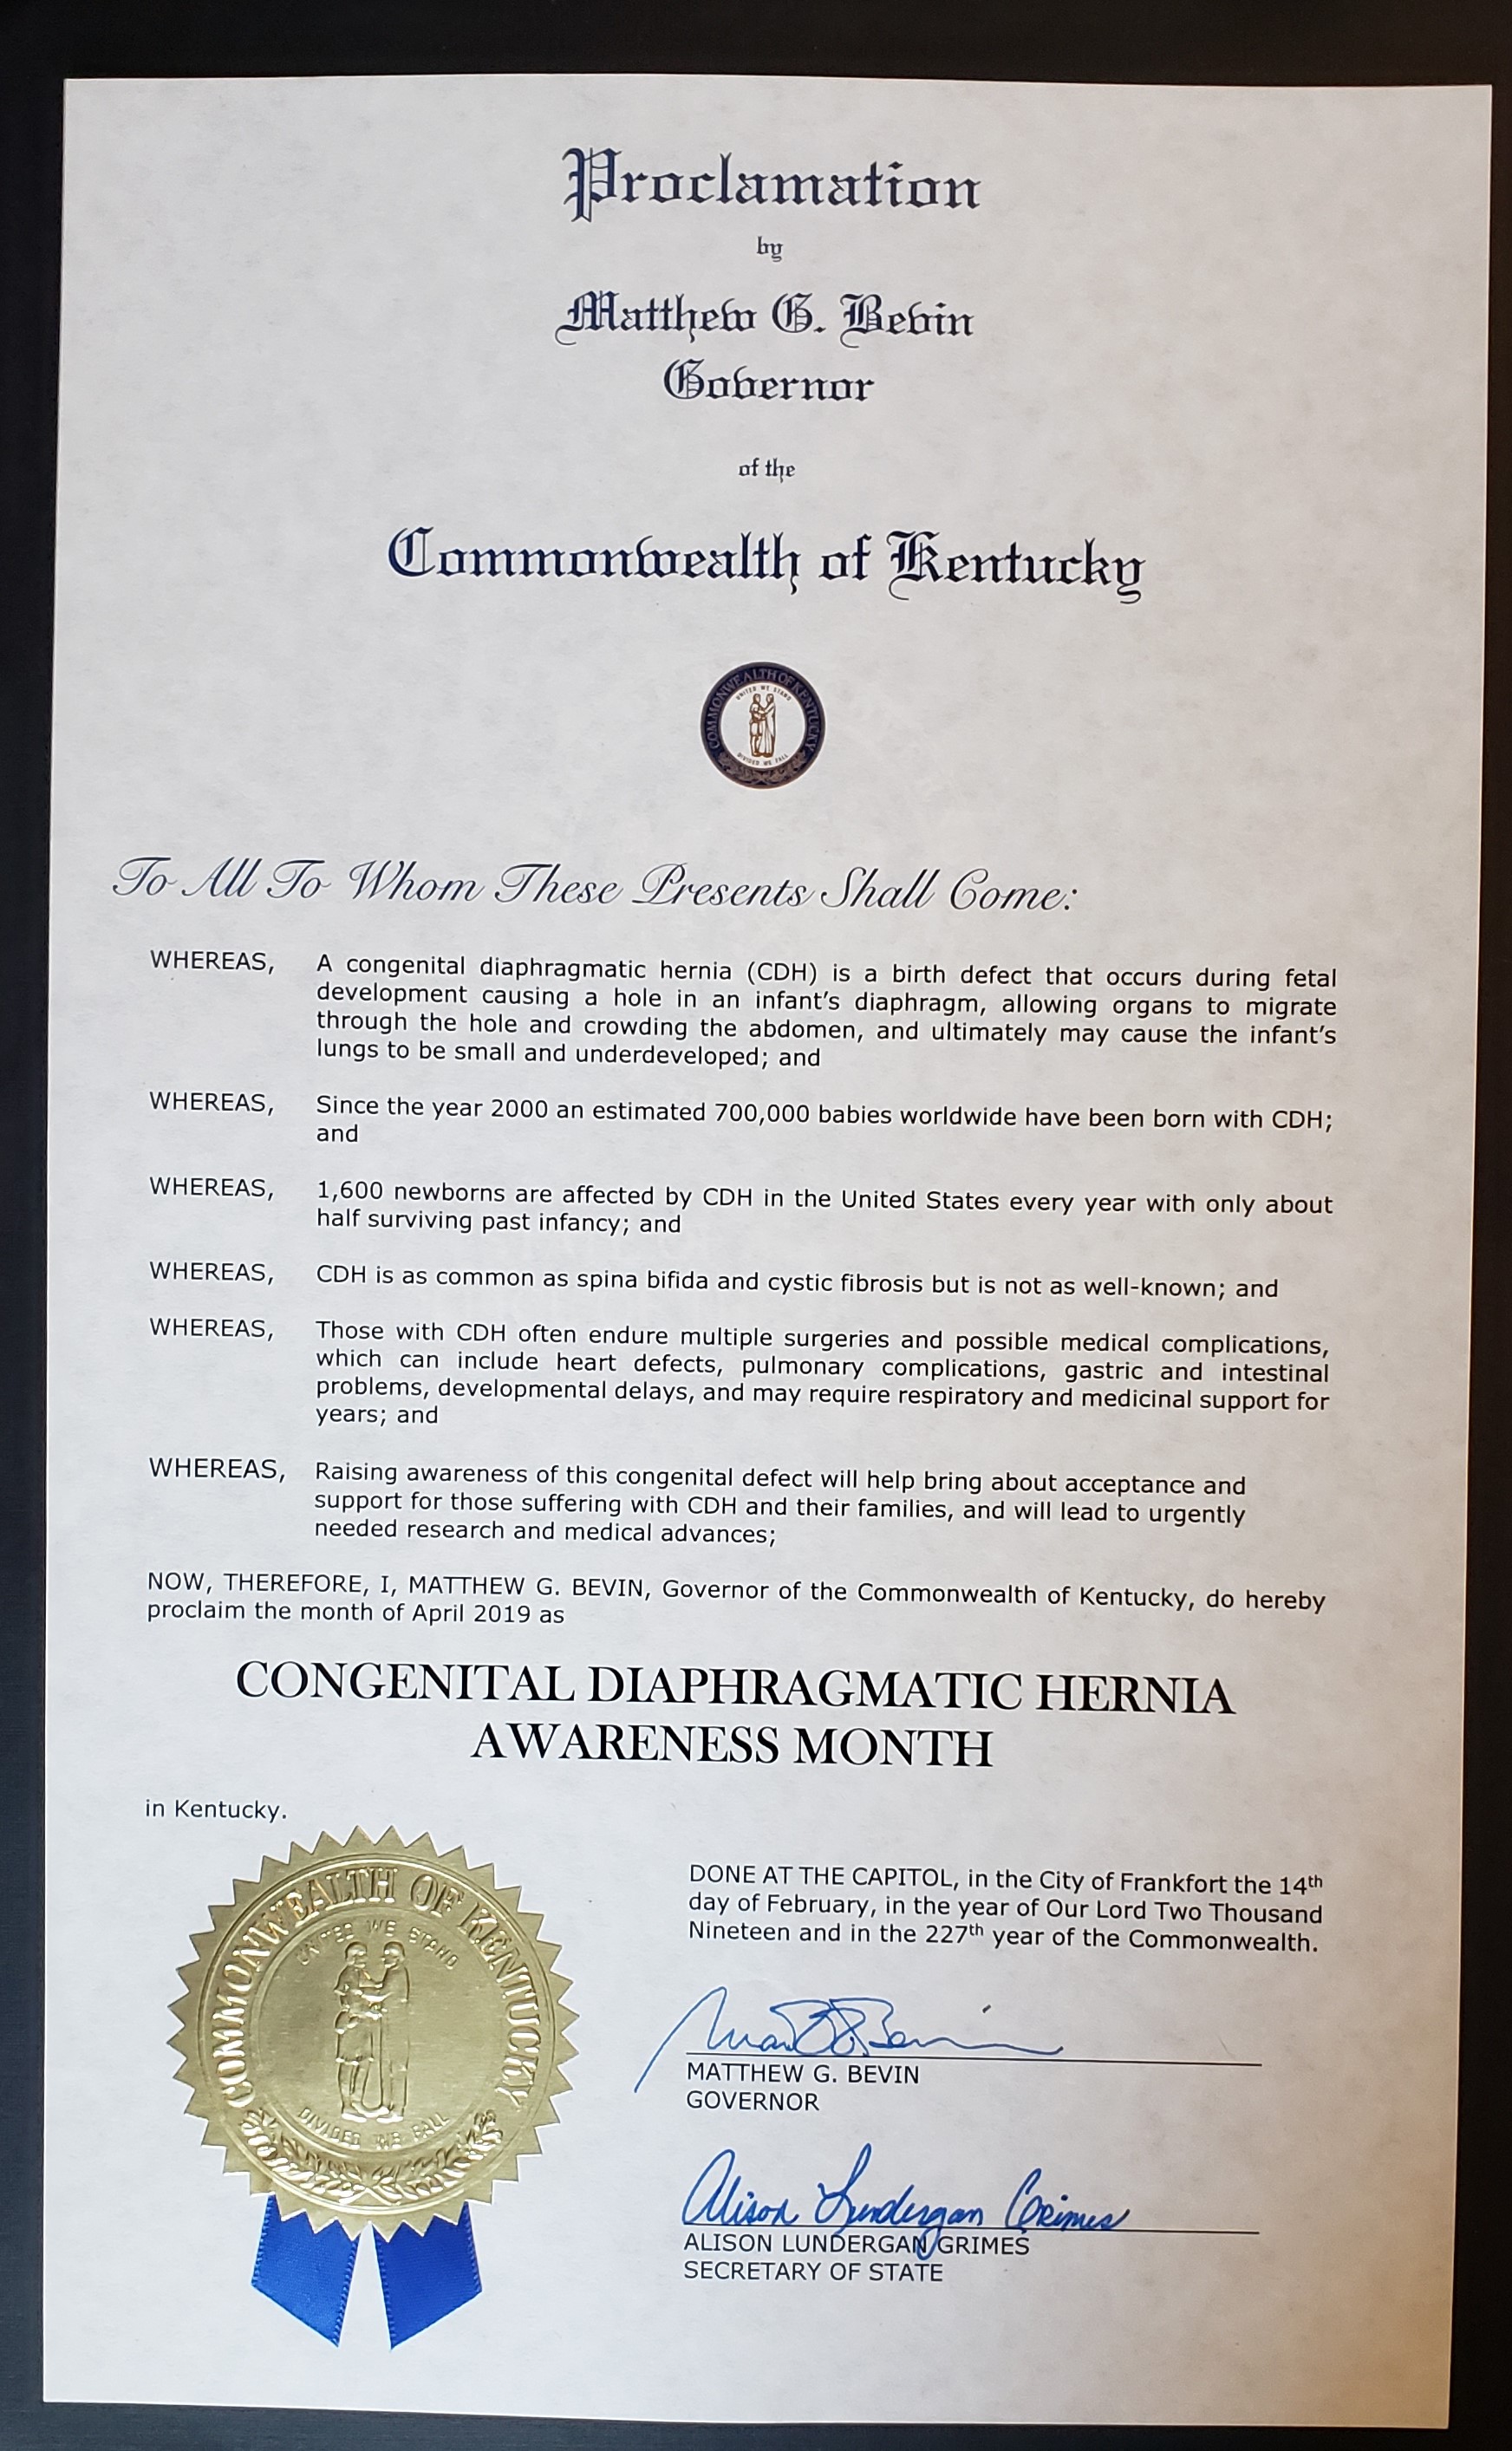 Mississippi Proclaims April 2019 CDH Awareness Month